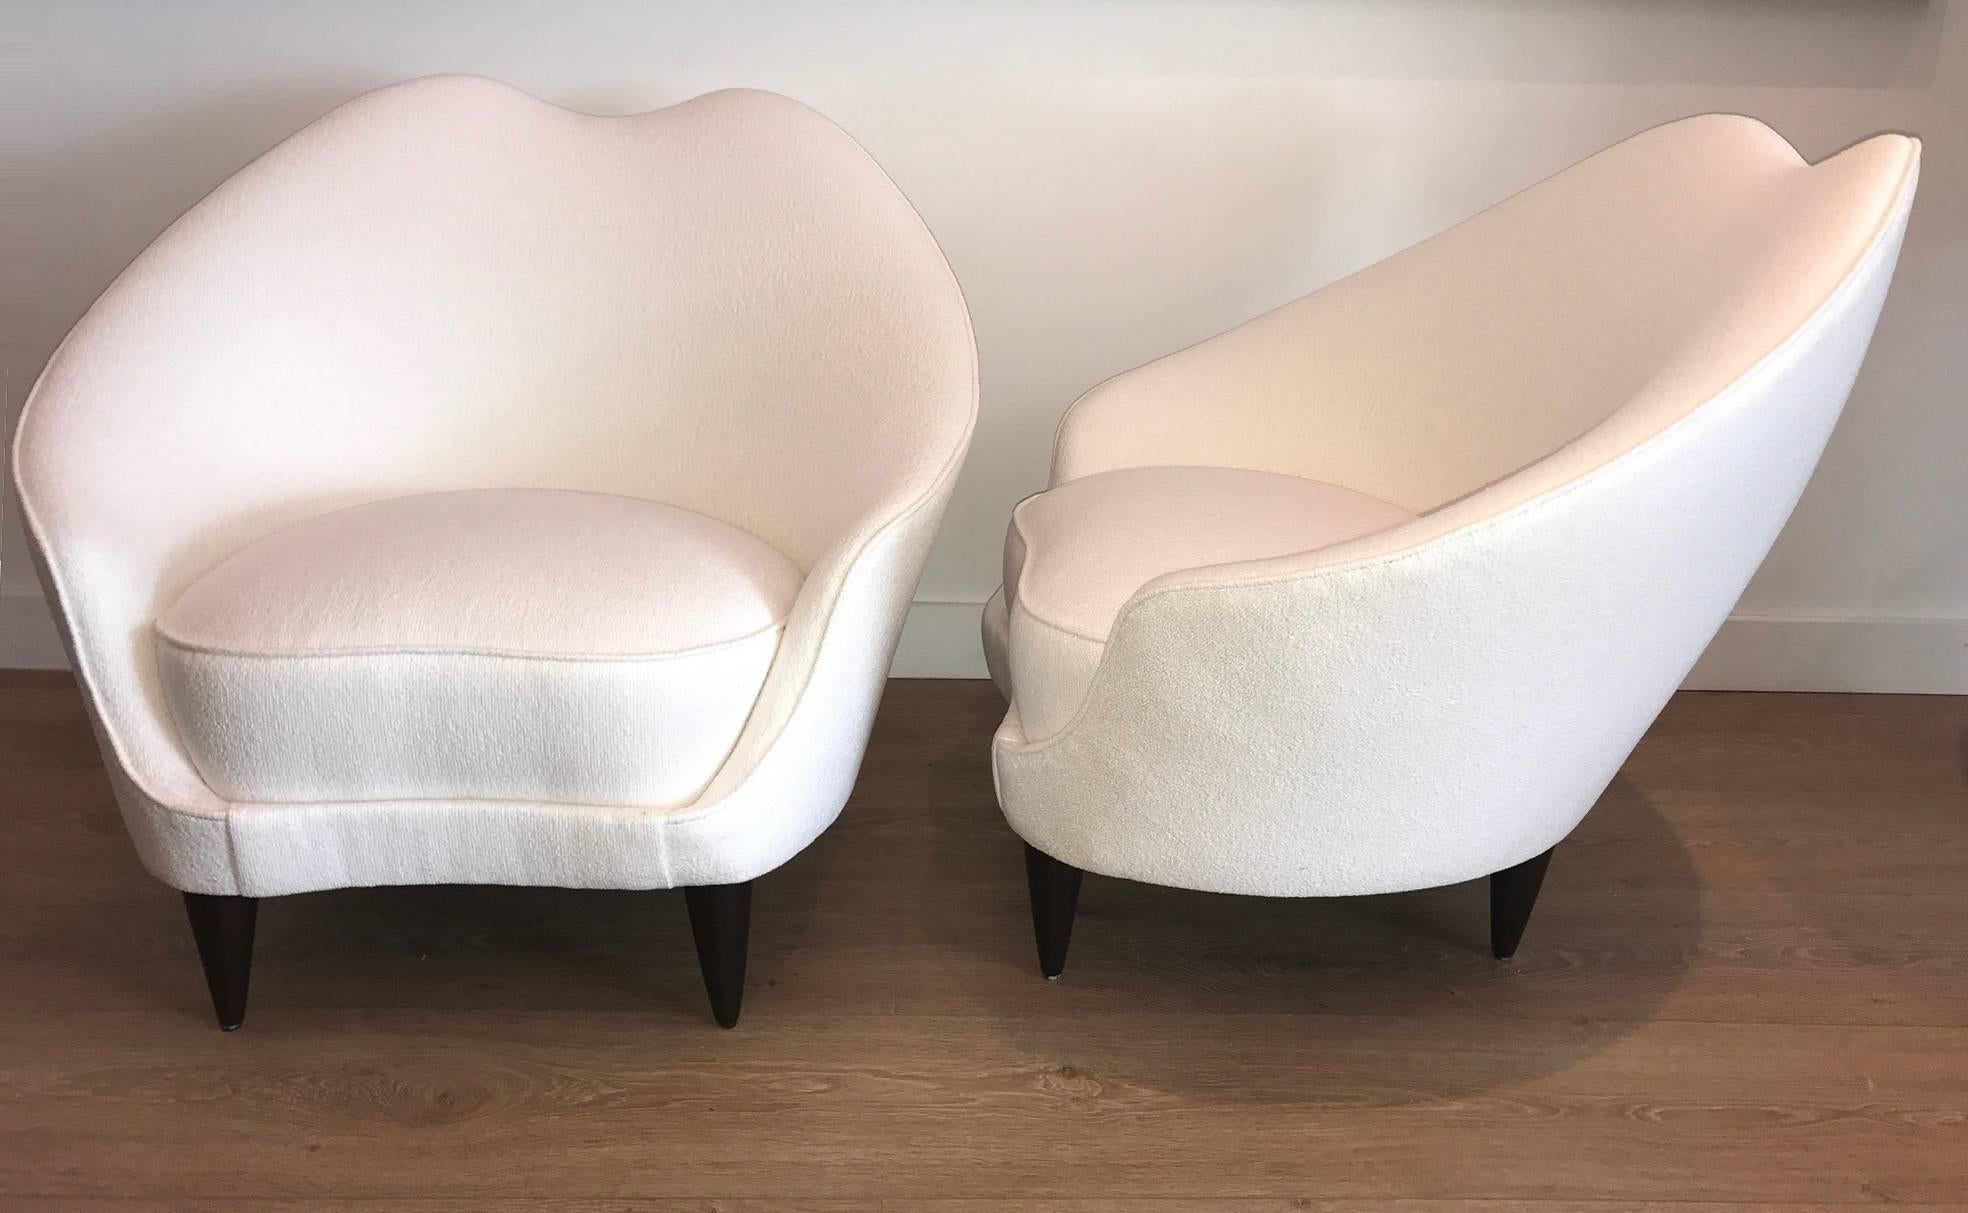 Curvaceous mid-century Italian lounge chairs by Federico Munari, Newly upholstered with a white bouclé fabric, dark stained conical wooden legs.
 
 